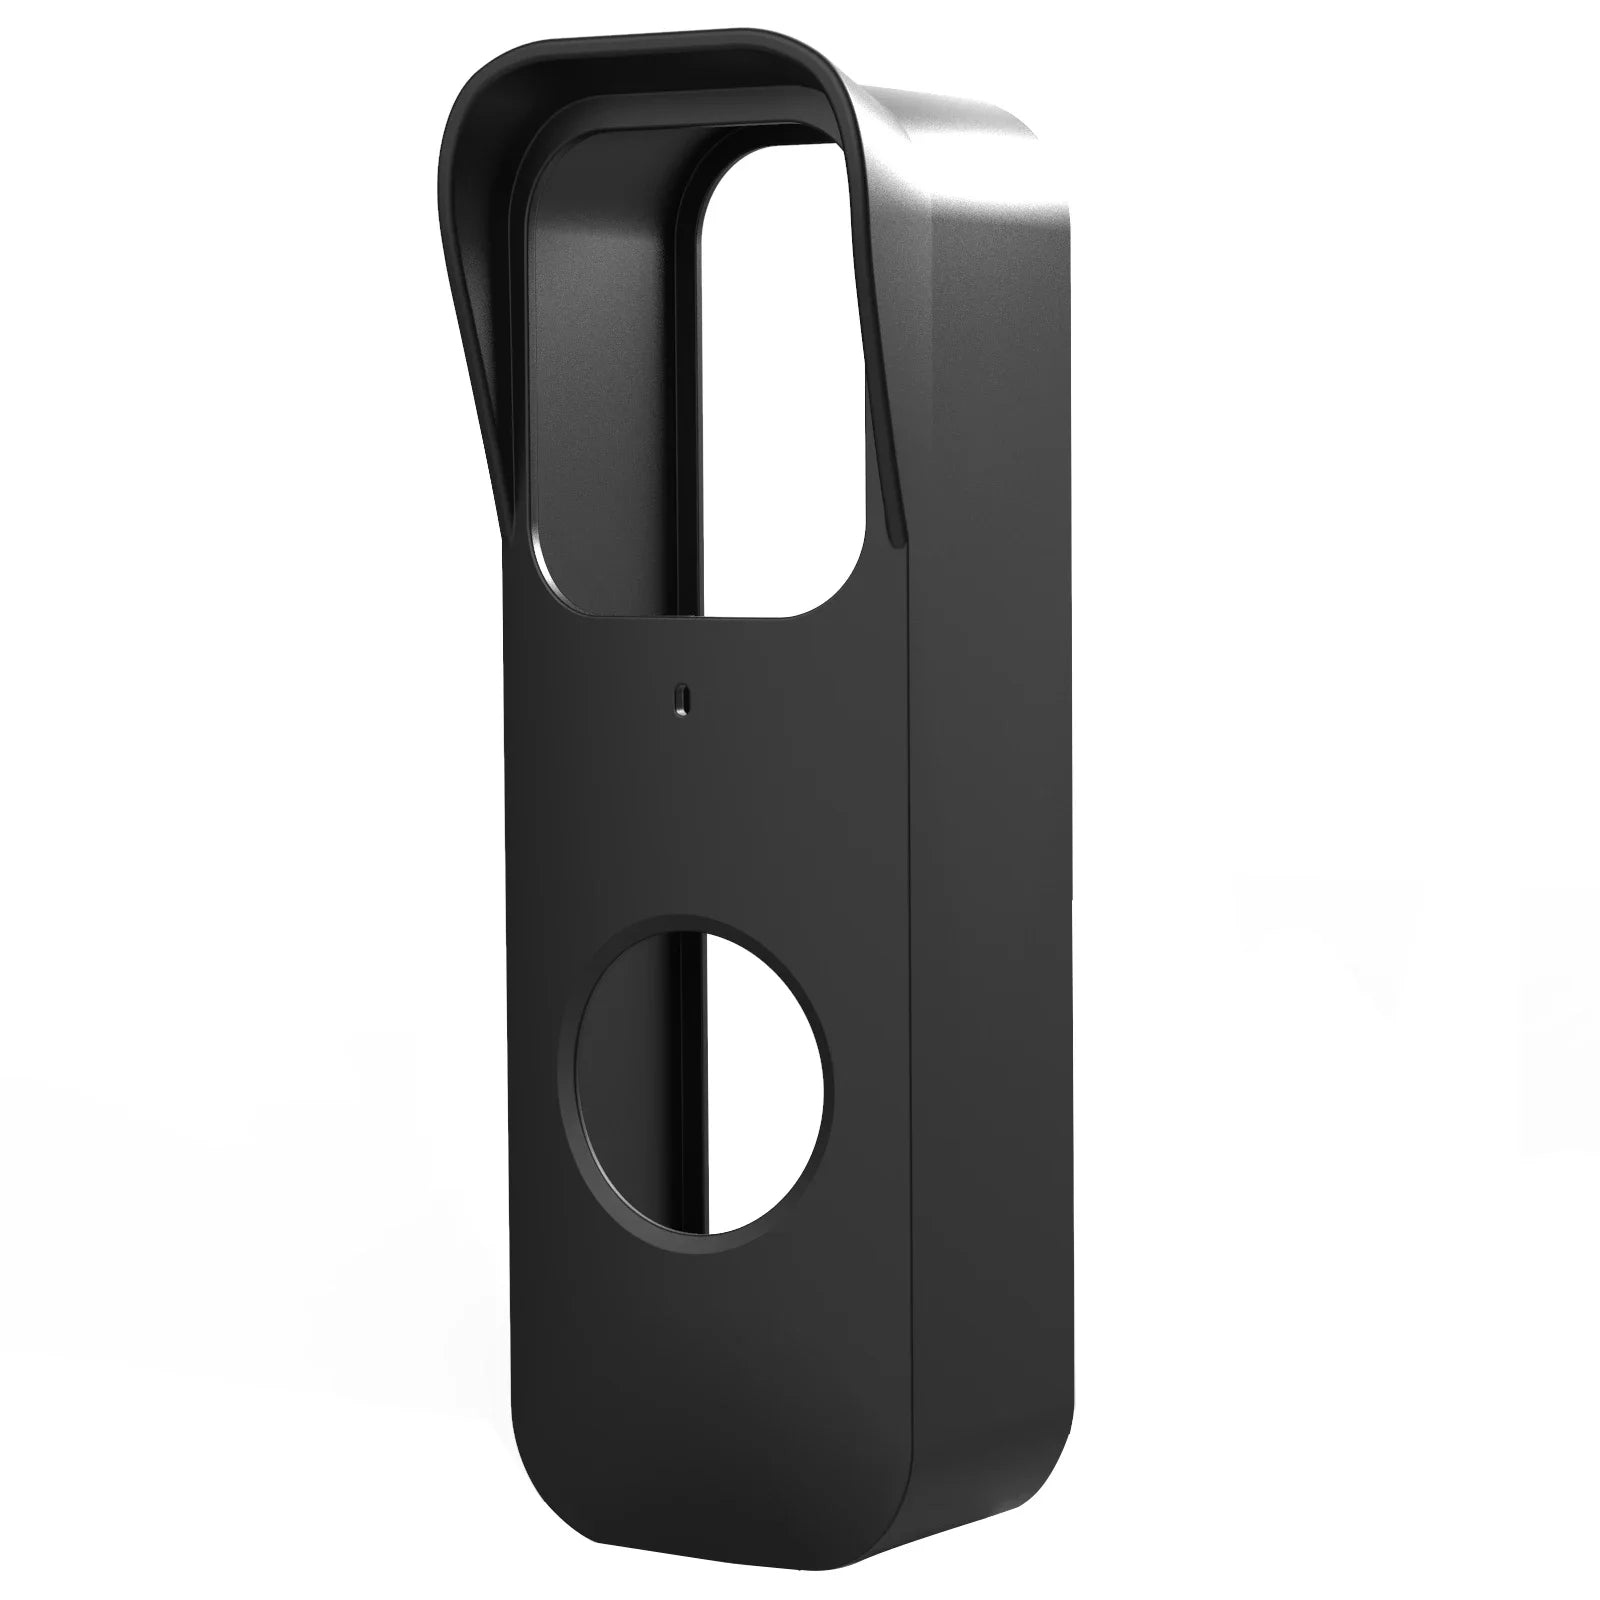 Protective Silicone Case Weatherproof Cover soft for Blink Video Doorbell/New Blink Outdoorbell